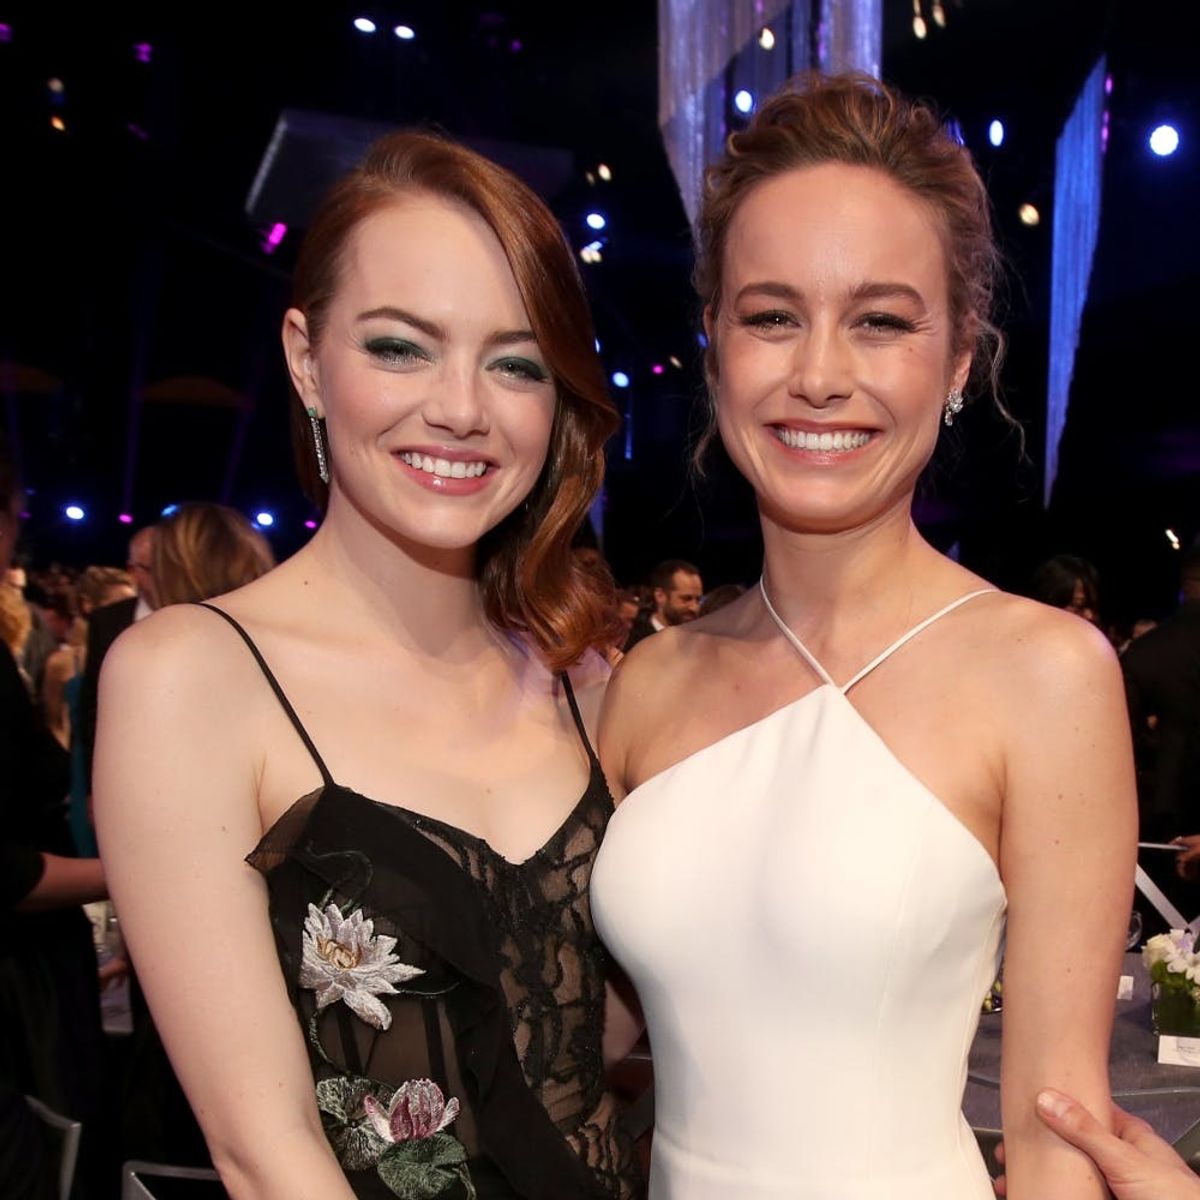 Emma Stone Broke Down in Brie Larson’s Arms Backstage at the Oscars